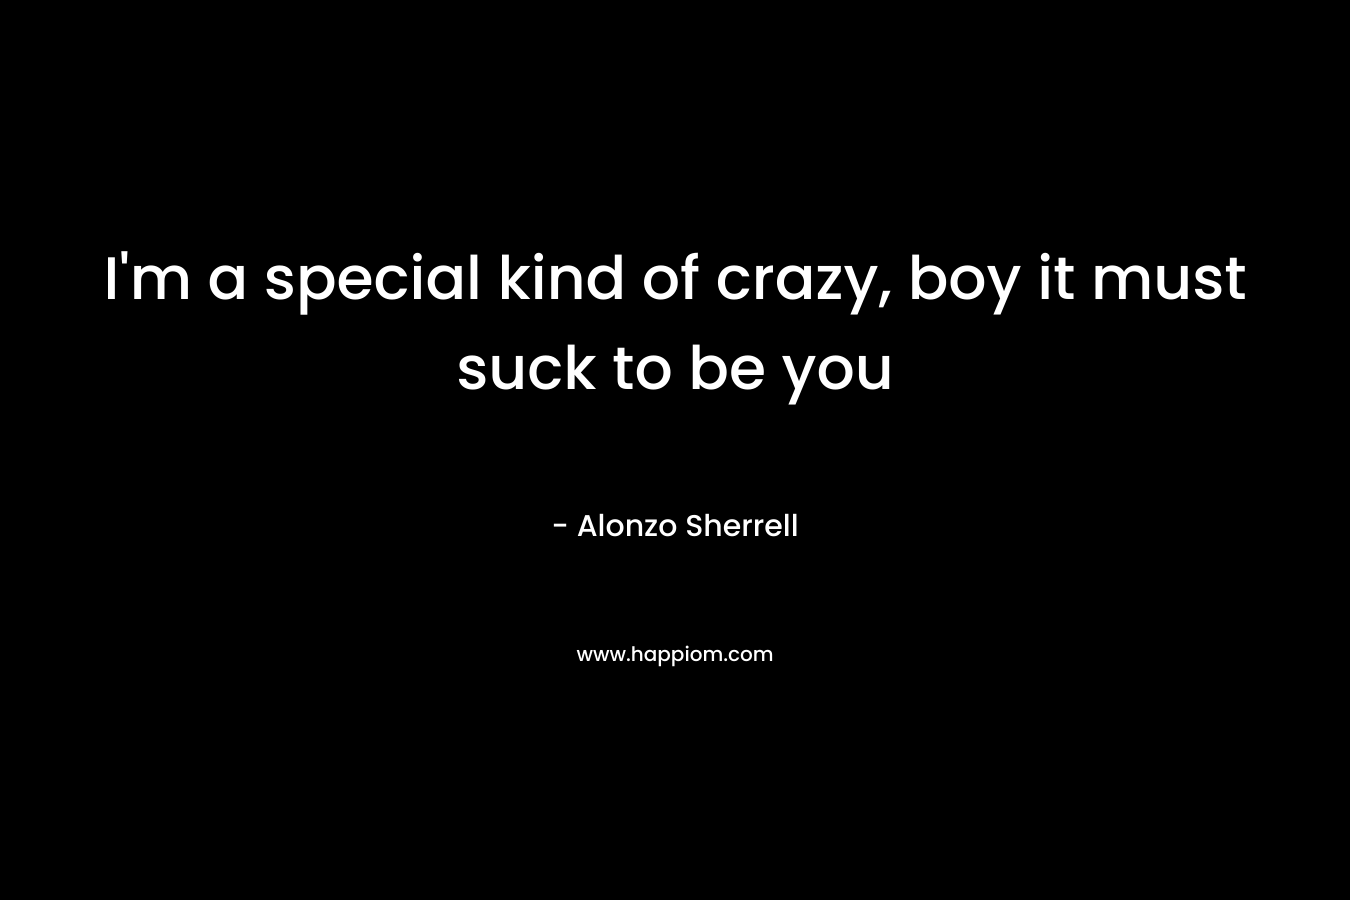 I’m a special kind of crazy, boy it must suck to be you – Alonzo Sherrell